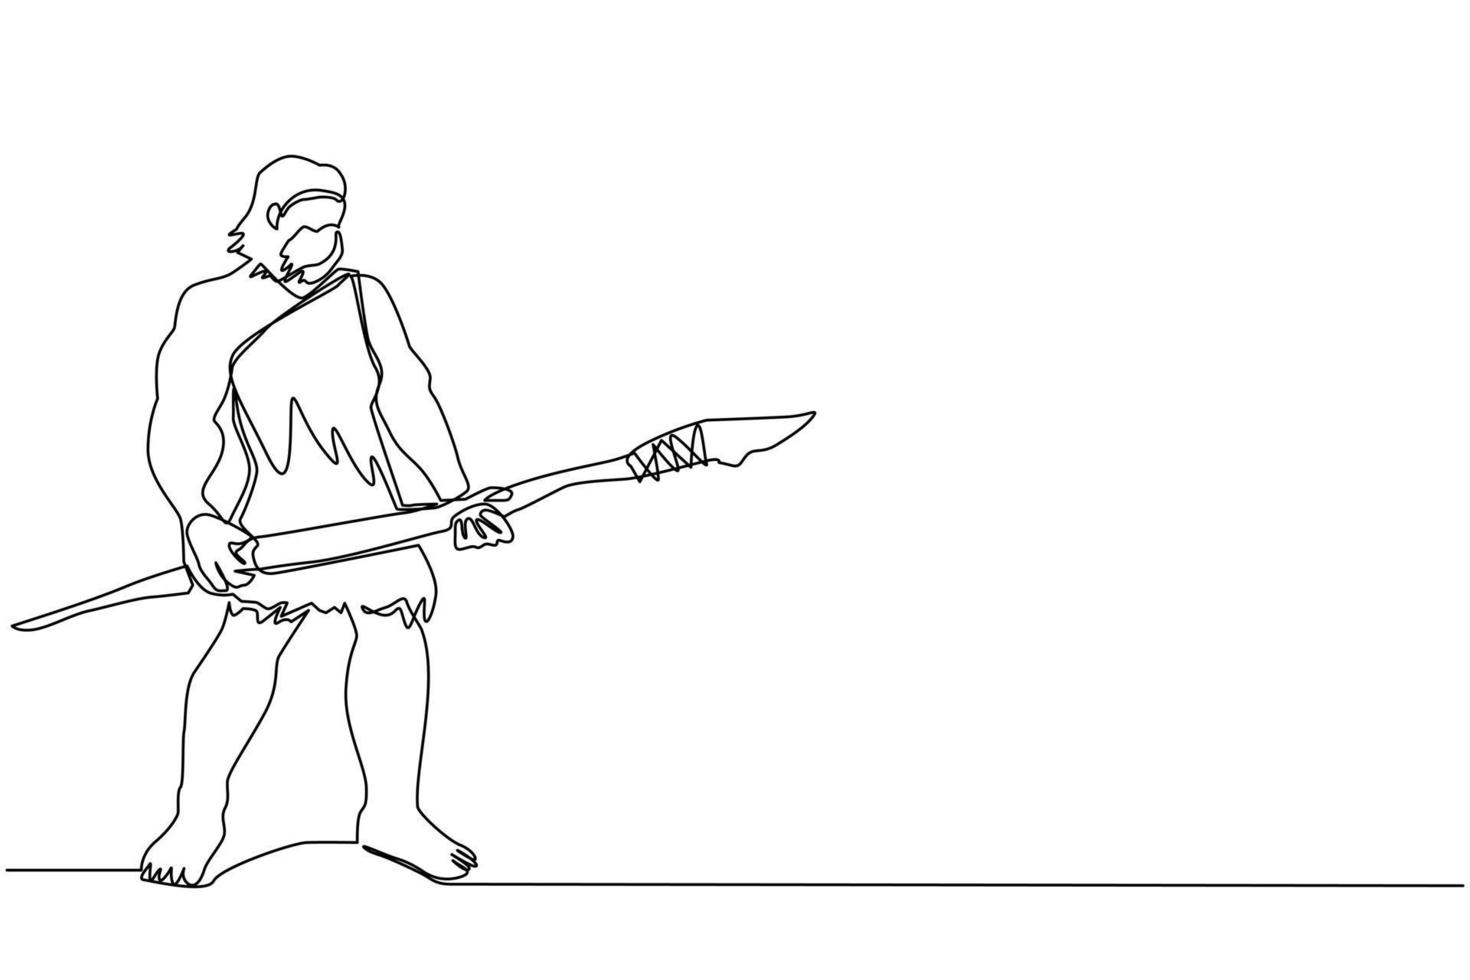 Continuous one line drawing caveman standing and holding big stone spear. Prehistoric bearded man dressed in animal pelt. Neanderthal hunter. Ancient homosapien. Single line draw design vector graphic